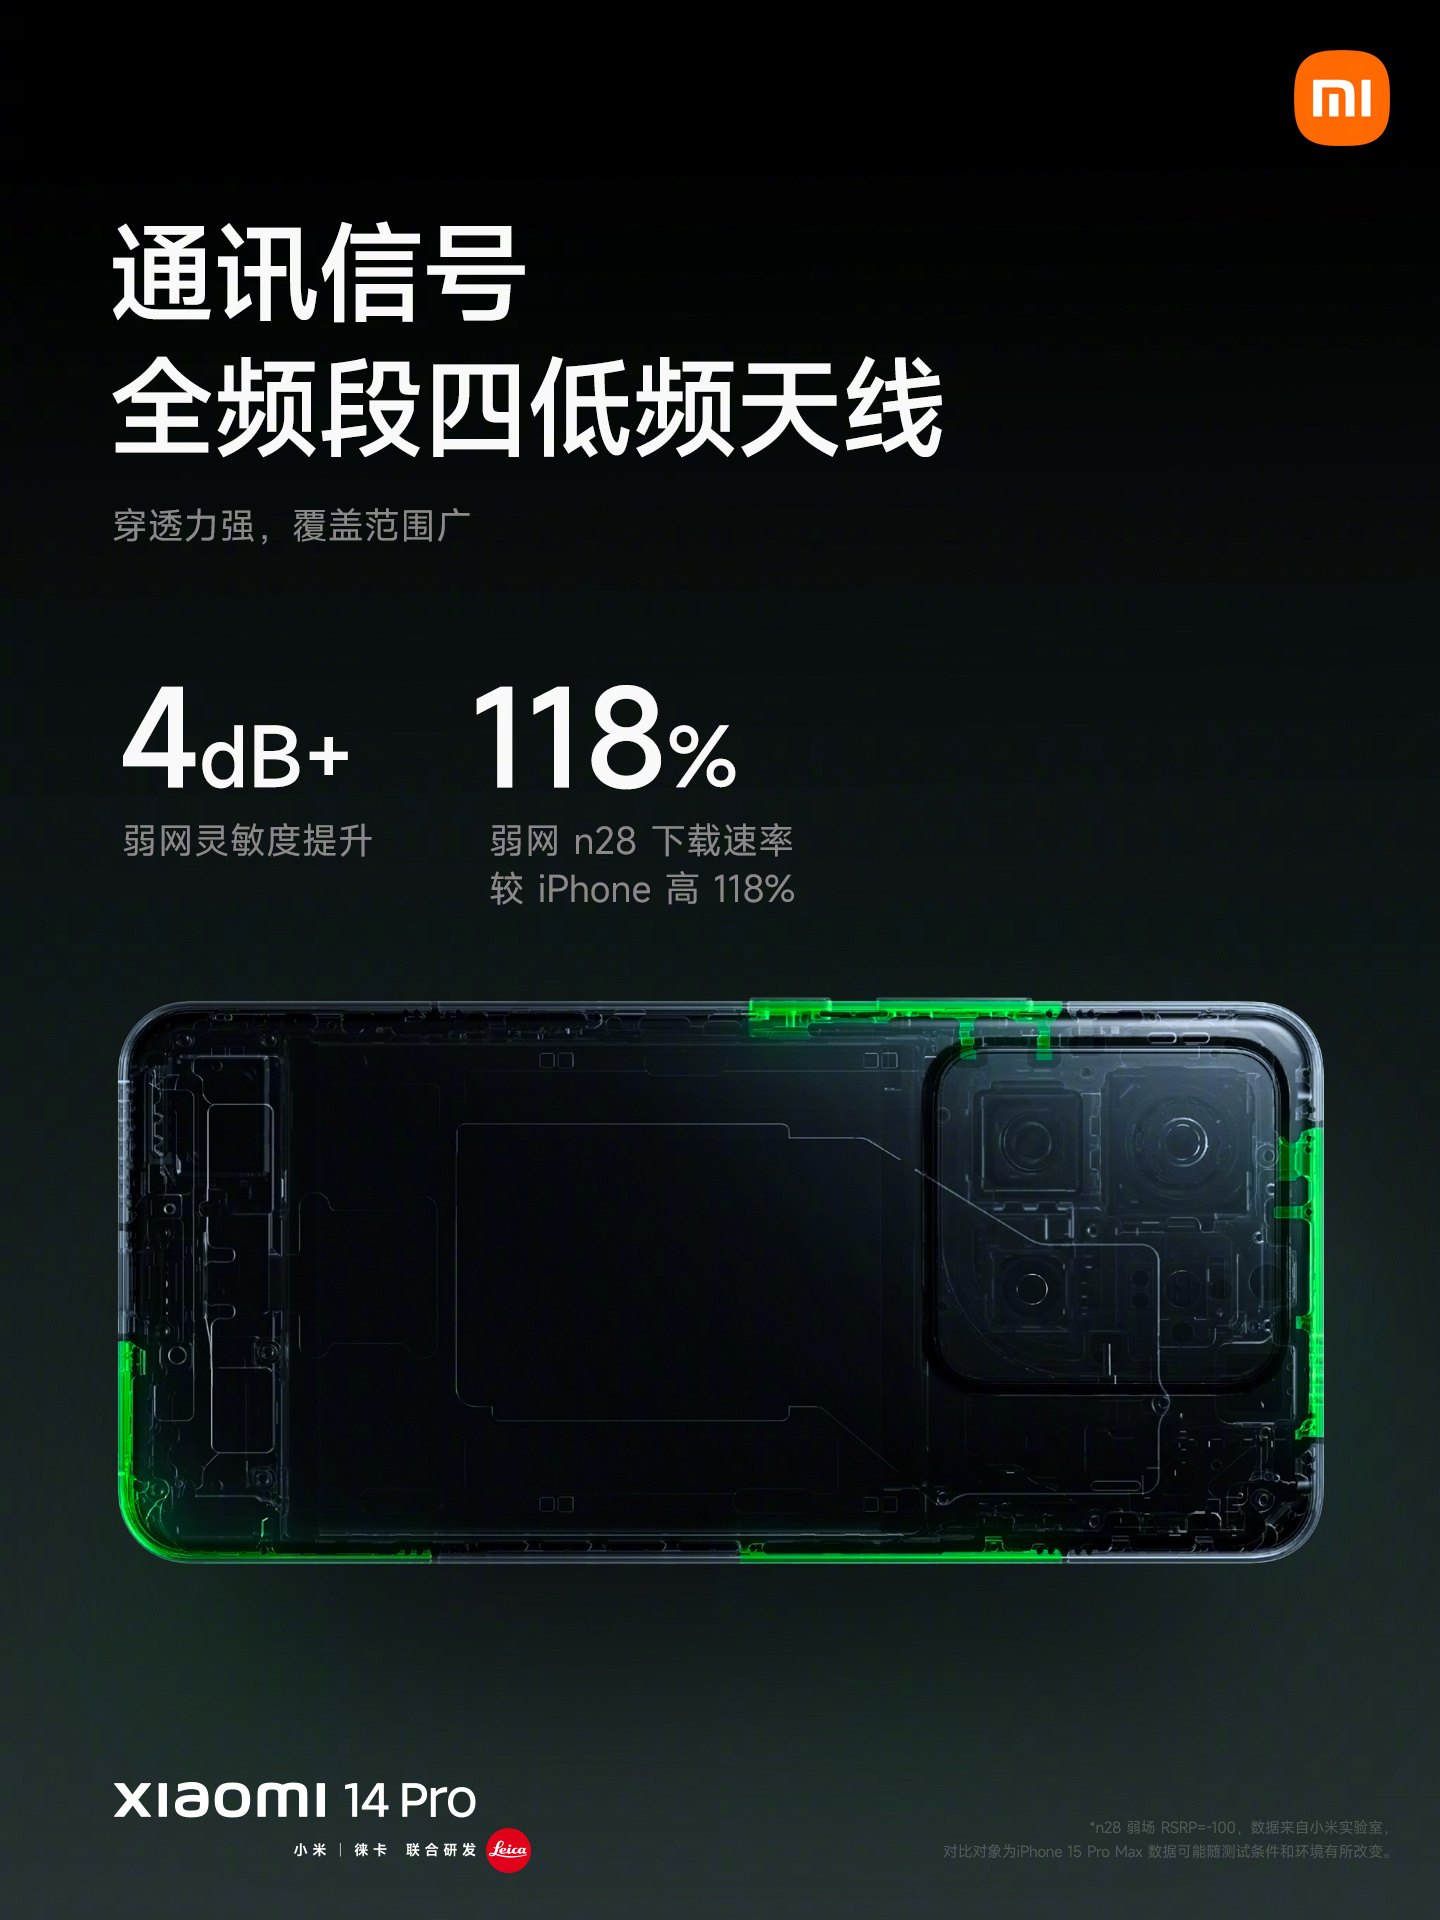 Xiaomi 14 Pro - Snapdragon 8 Gen 3, Leica cameras, 120Hz WQHD+ display and 120W  charging priced from $685